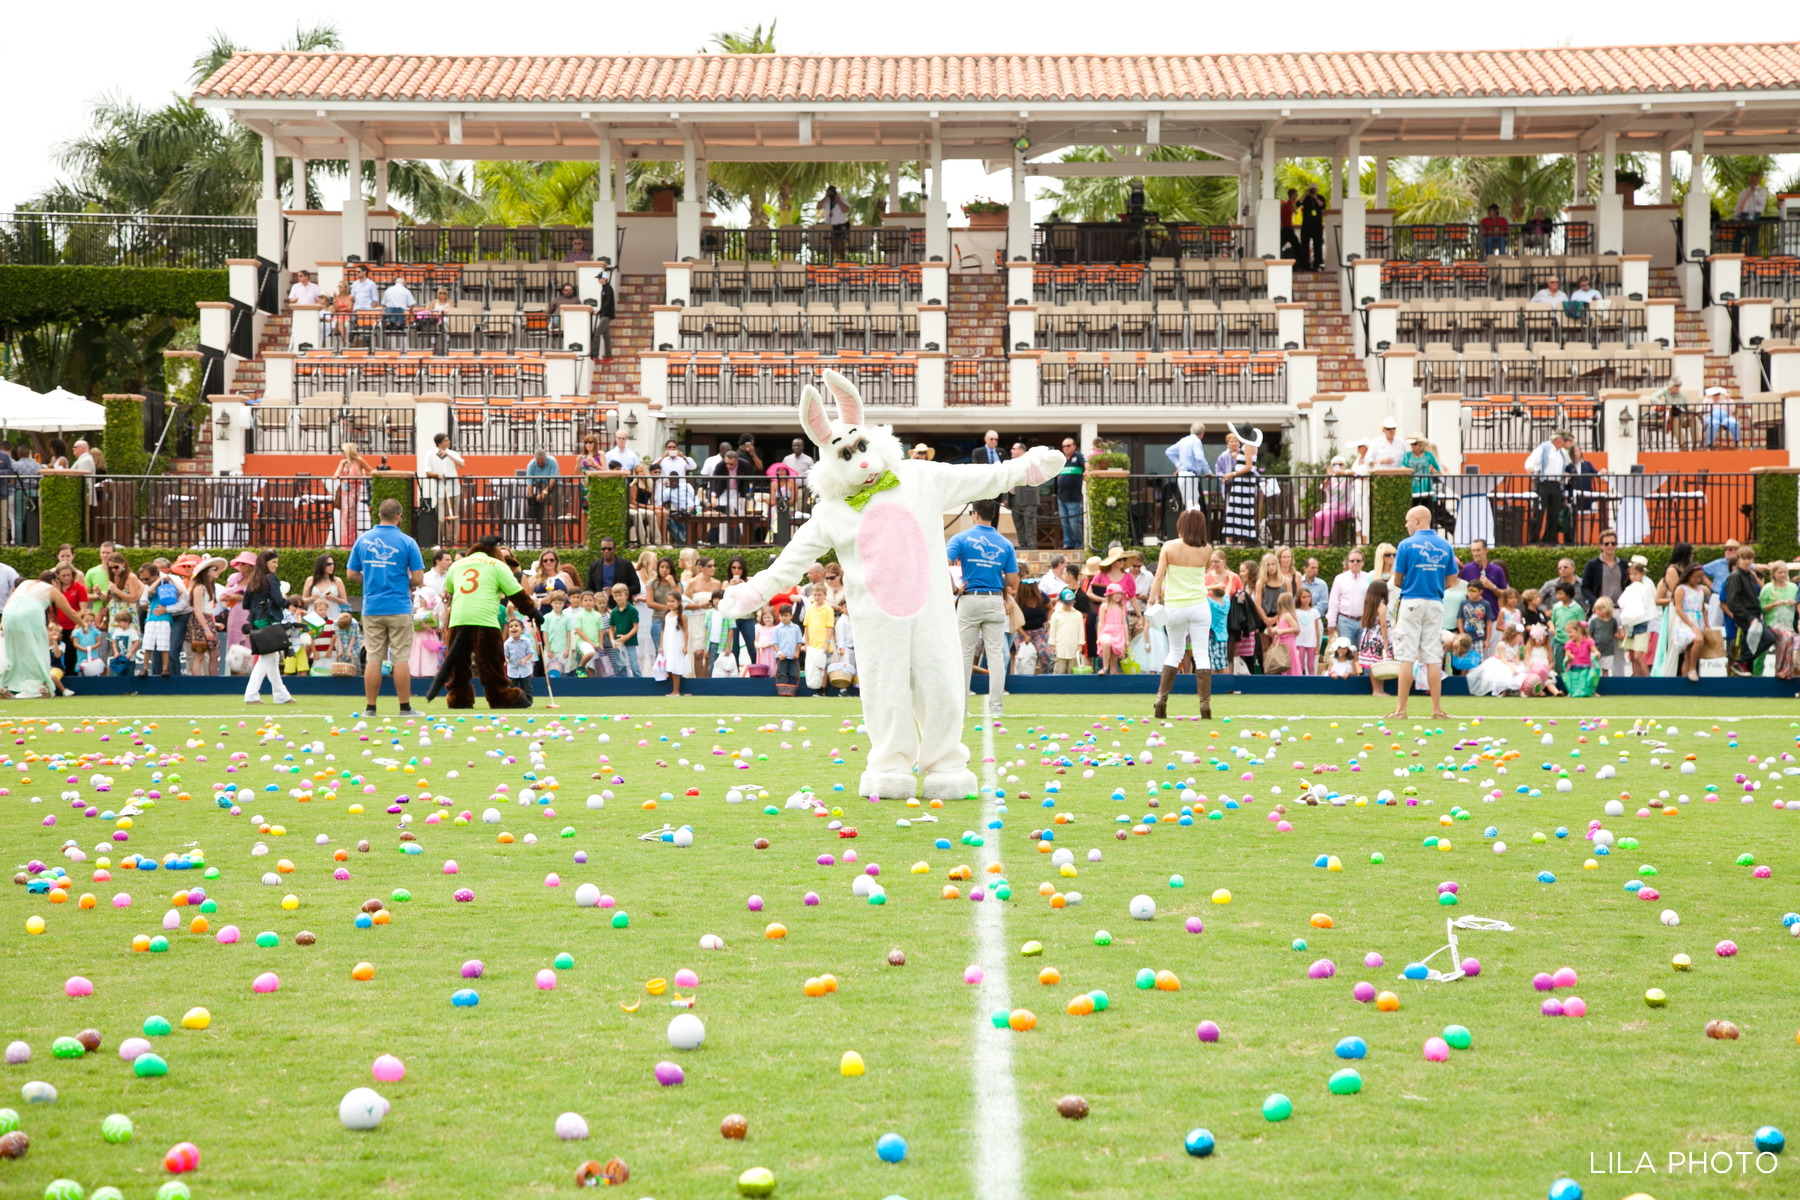 The Easter Bunny before the Egg Hunt Extravaganza